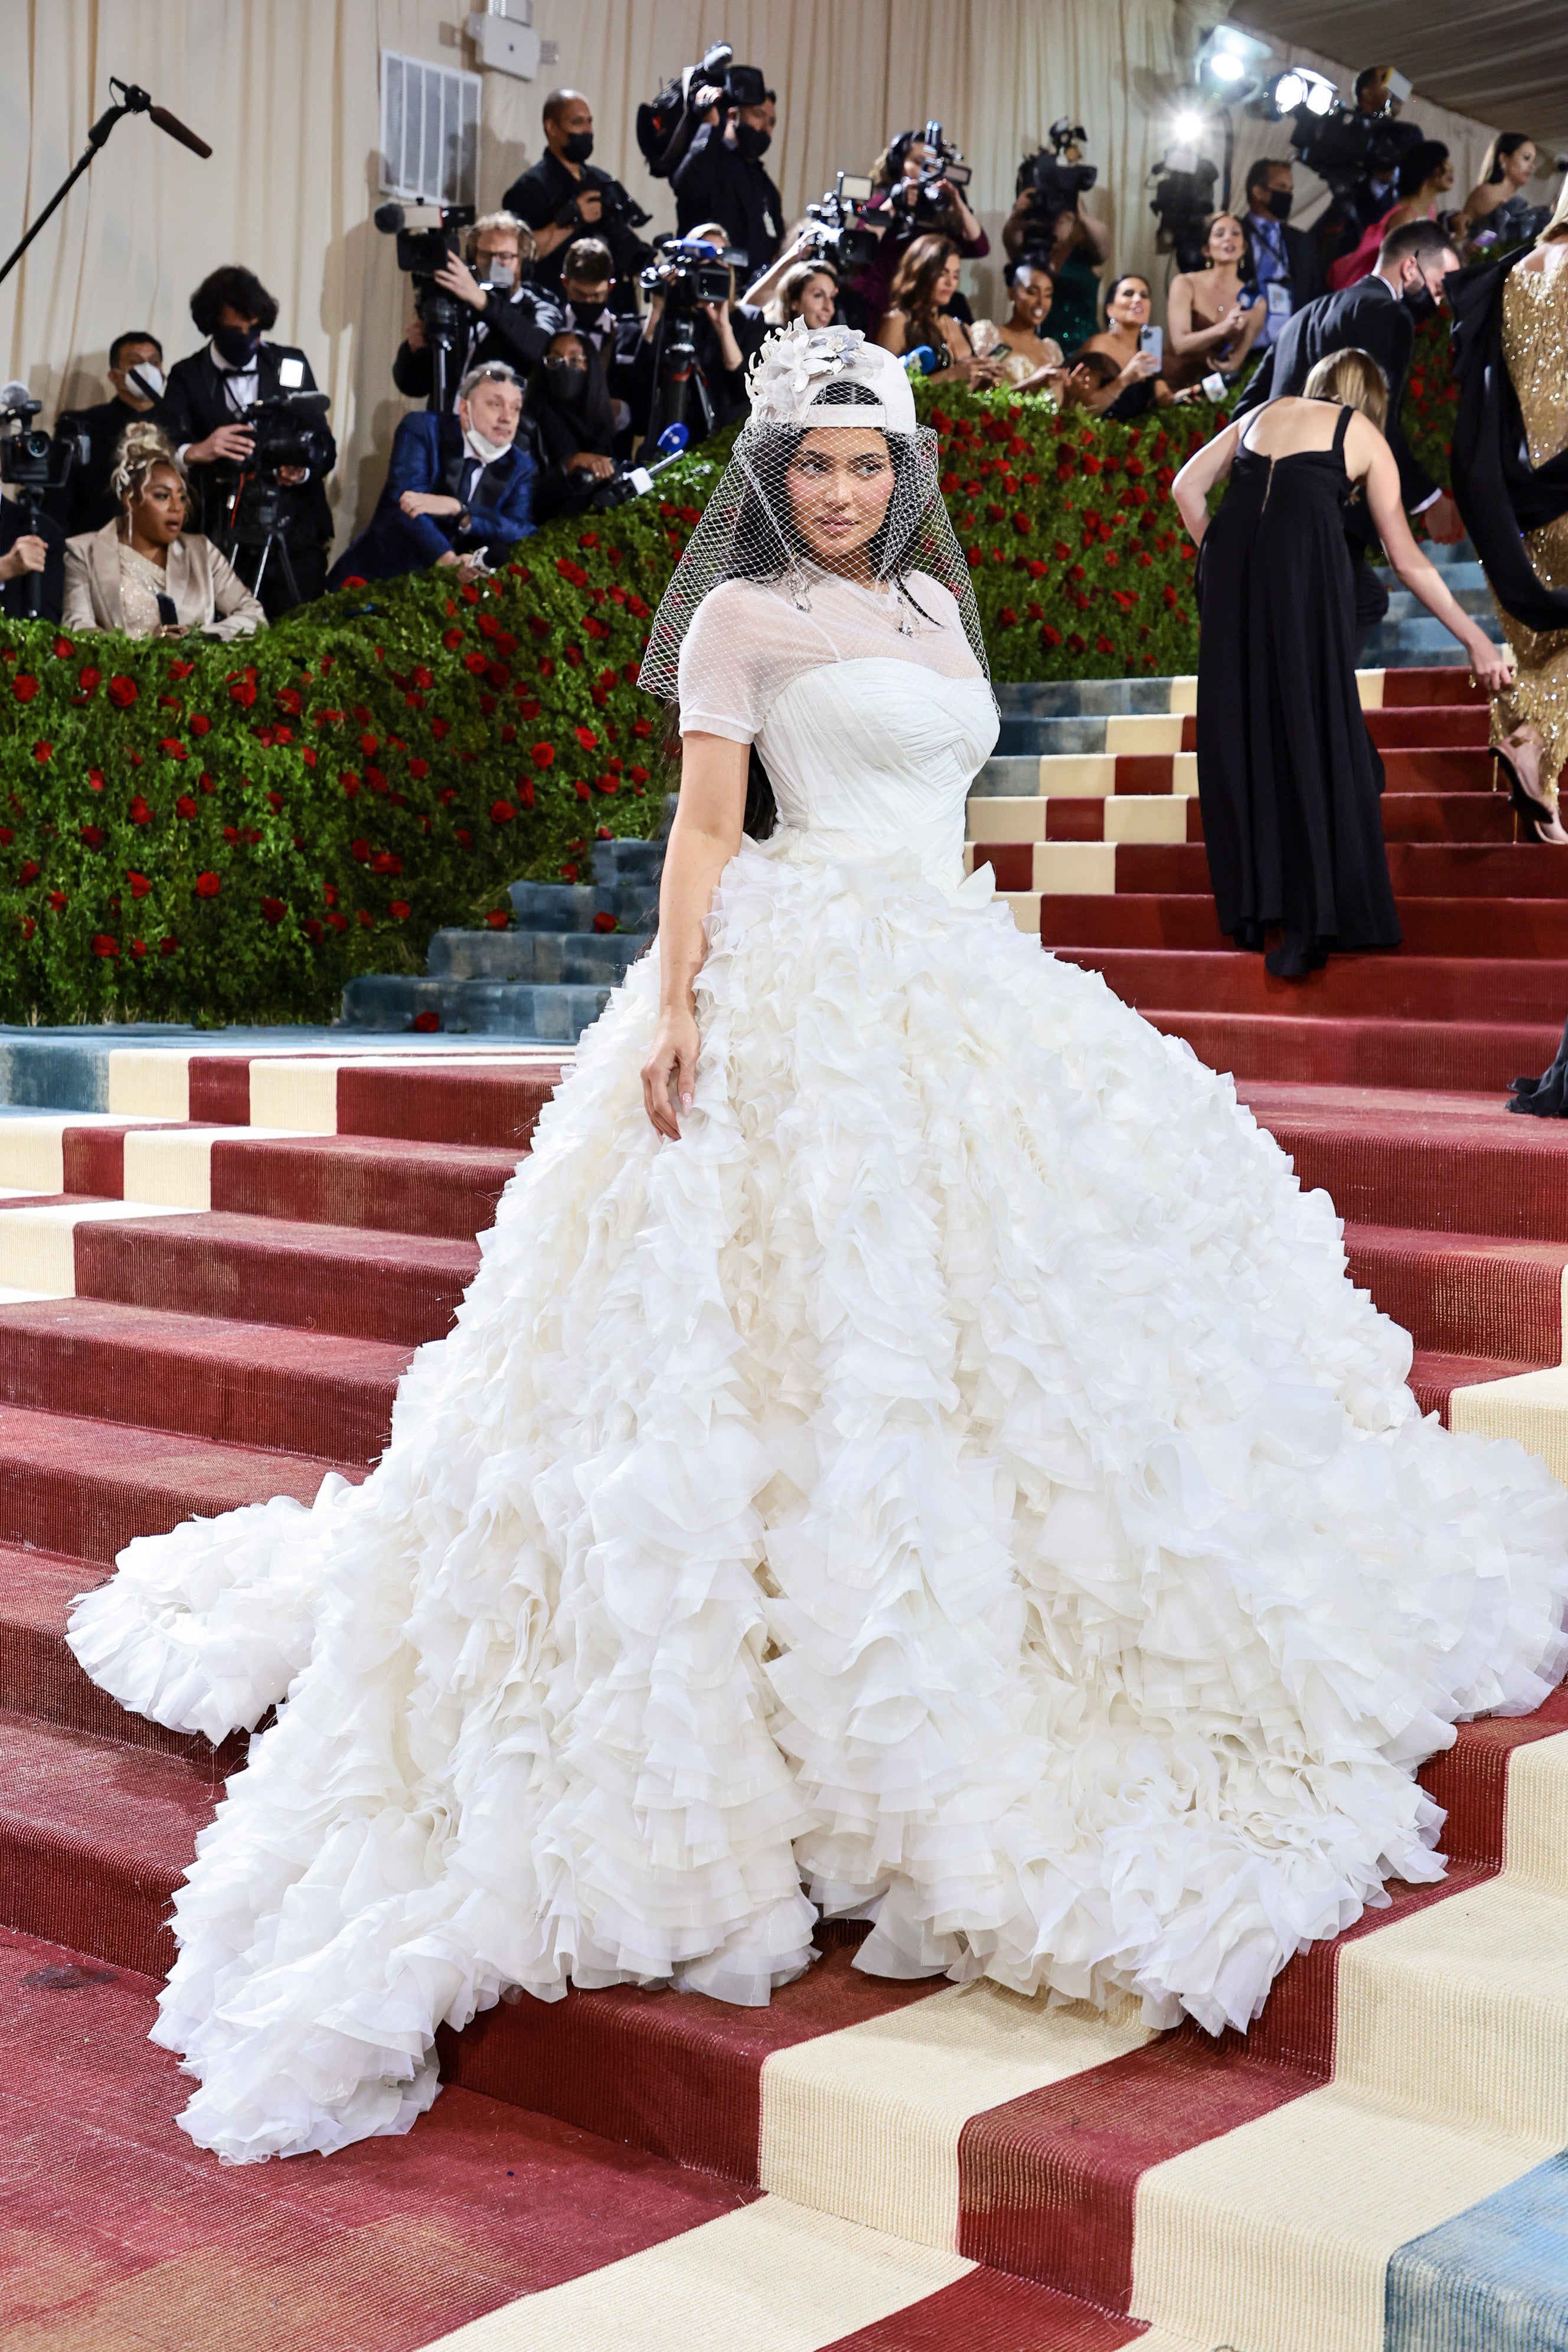 Kylie Jenner in Virgil Abloh’s Off-White Fall 2022 wedding gown at the 2022 Met Gala